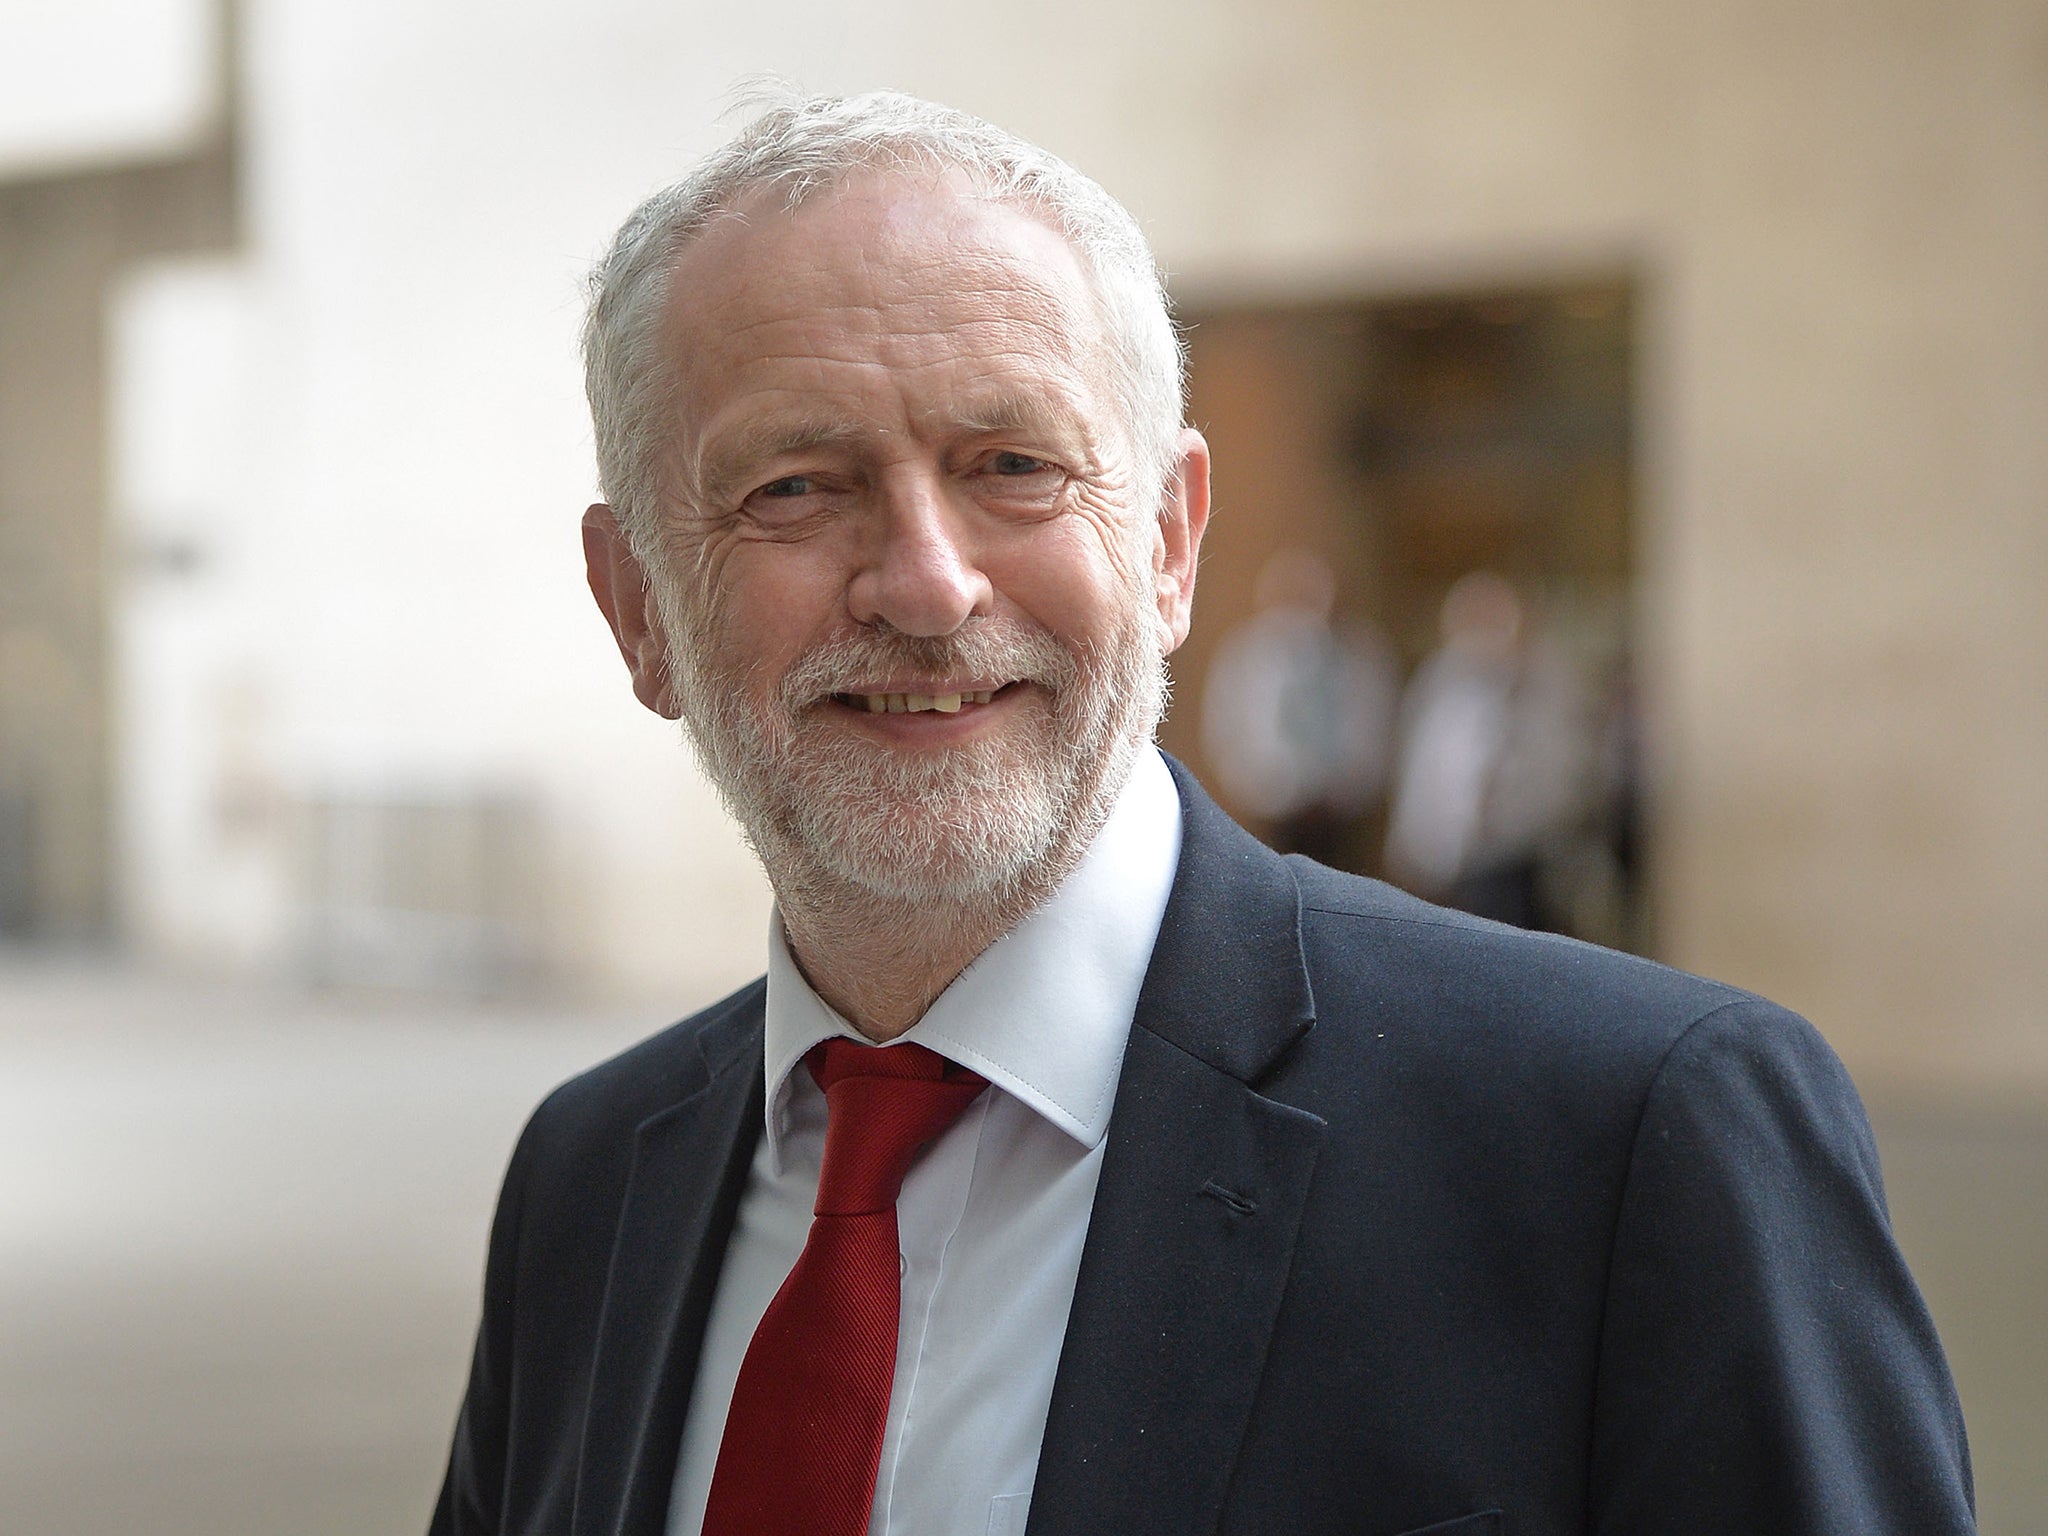 Mr Corbyn also told delegates at the trade union's conference that if Labour won the next election, his government would end the public sector pay gap